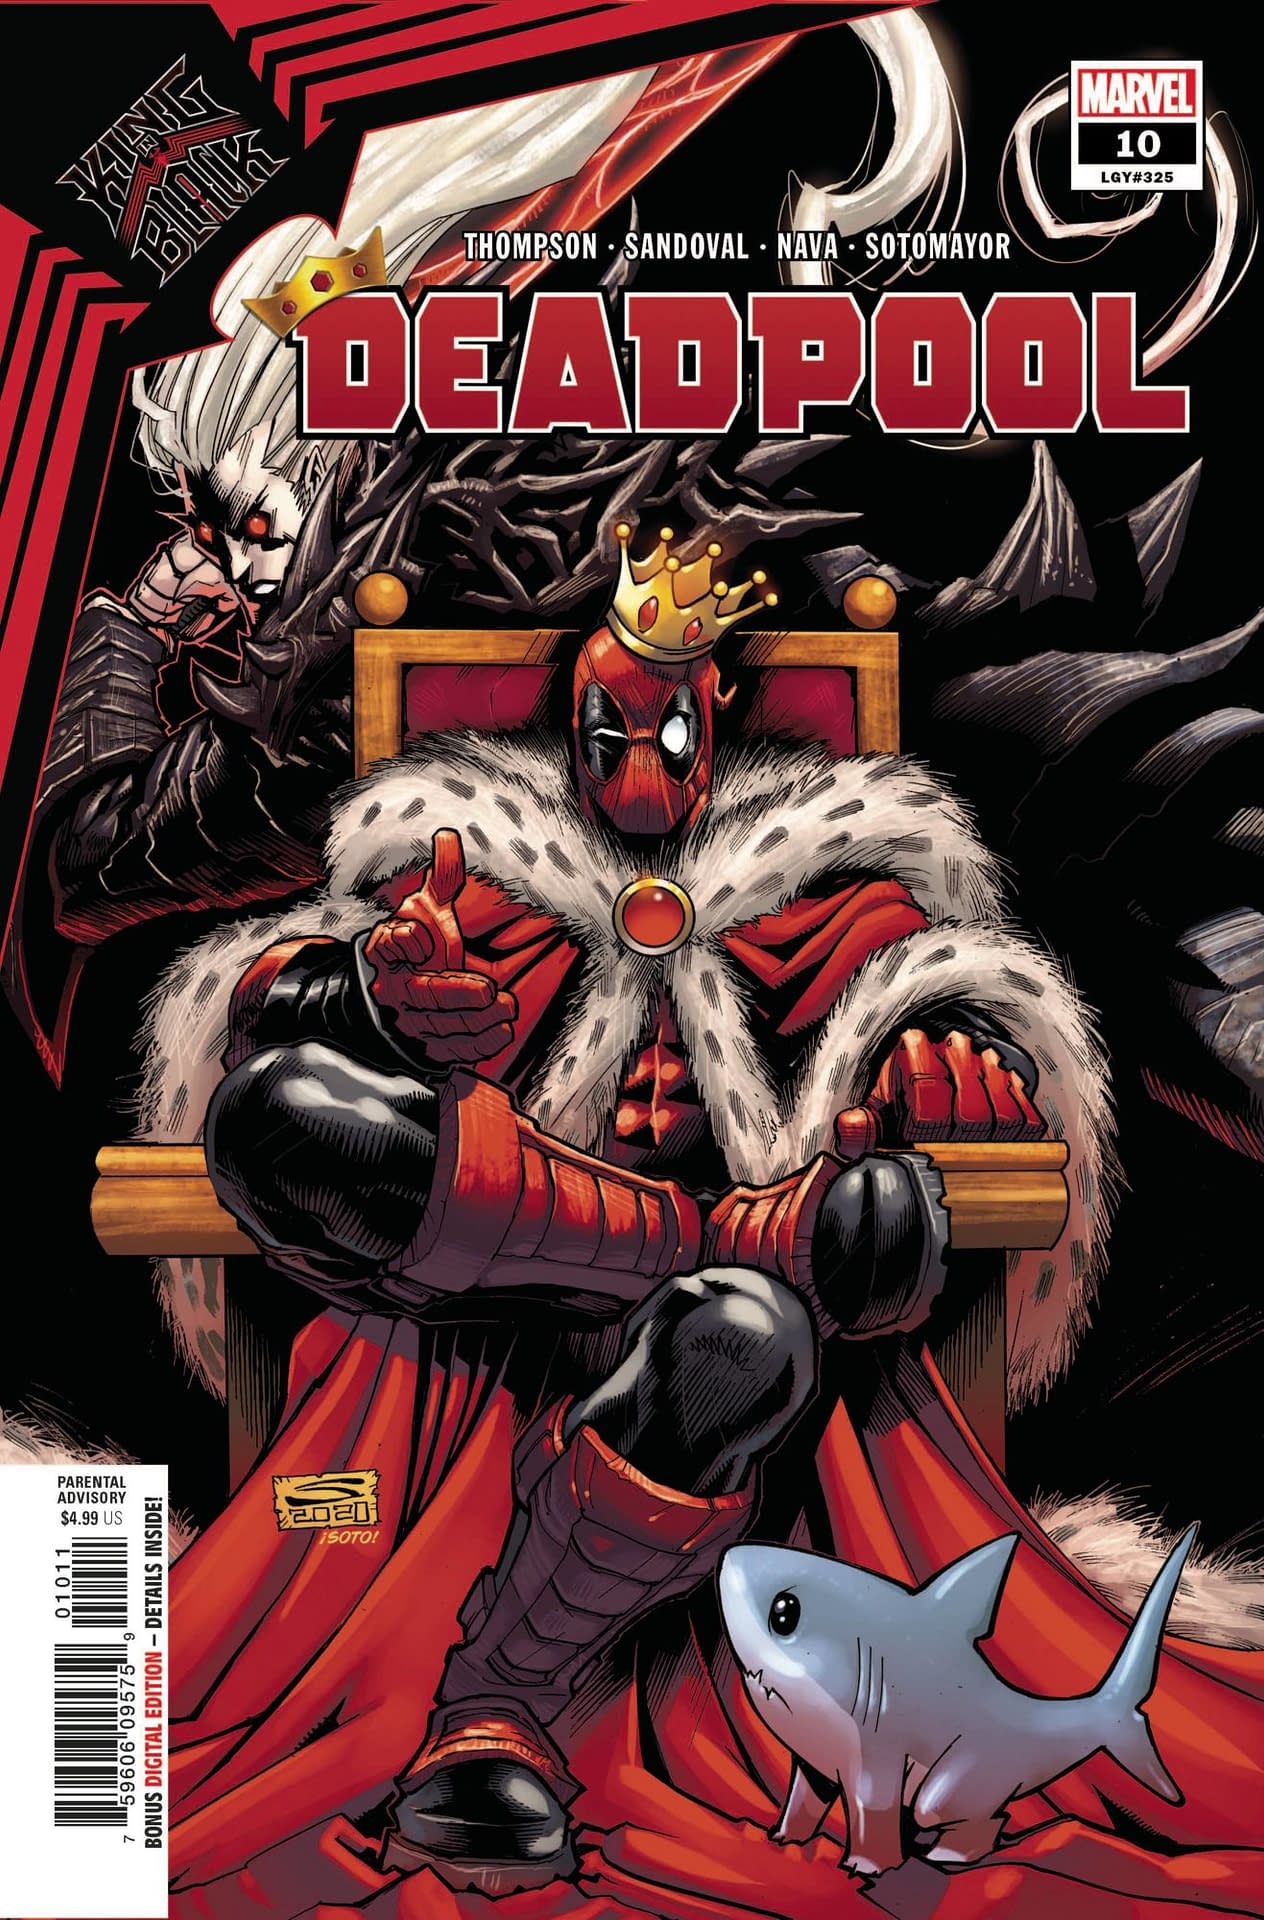 when did deadpool 1 come out